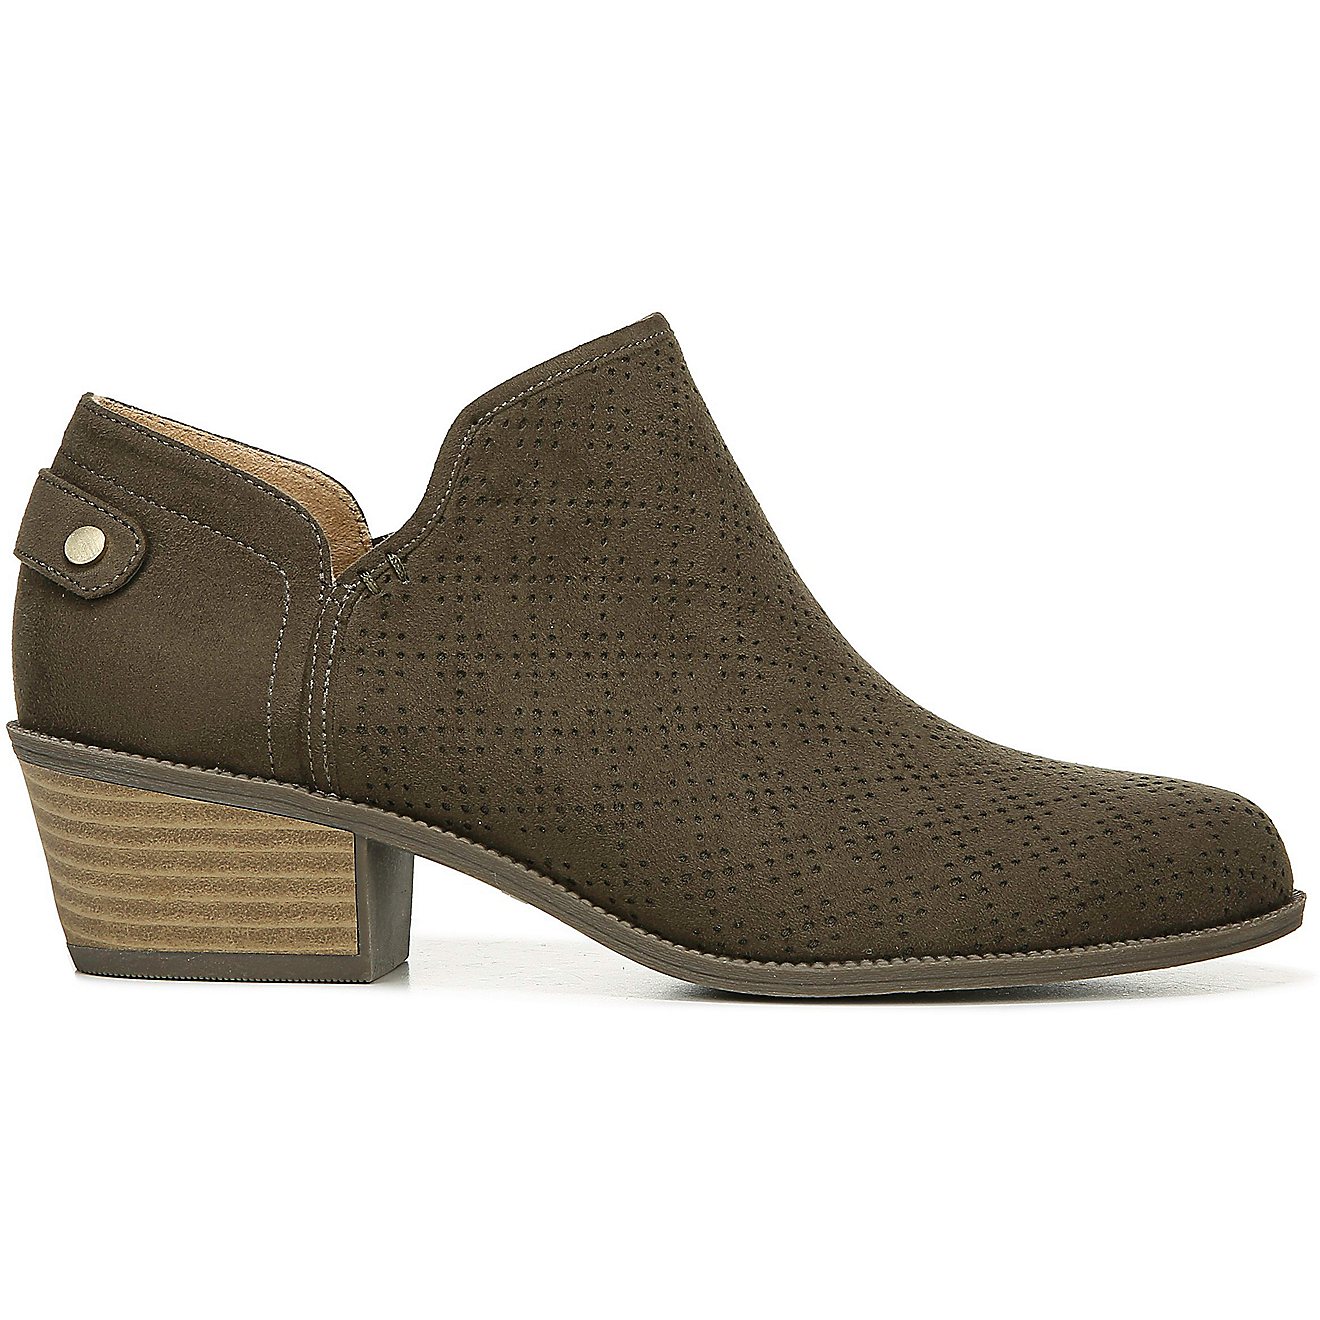 Dr. Scholl's Women's Bandit Booties | Free Shipping at Academy